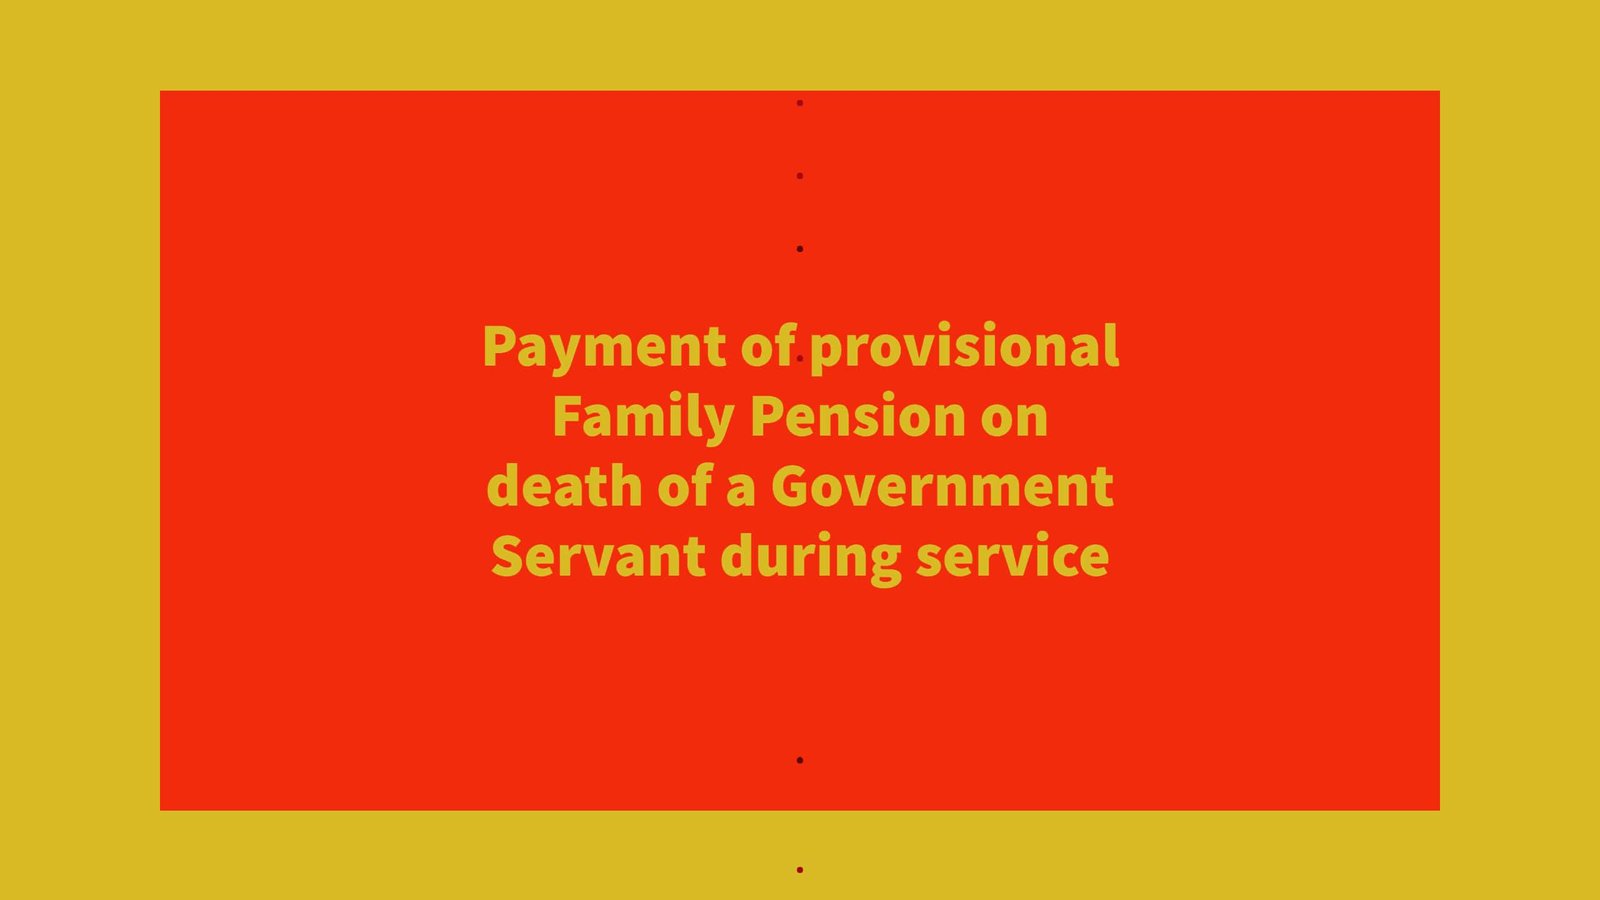 Payment of provisional Family Pension on death of a Government Servant during service